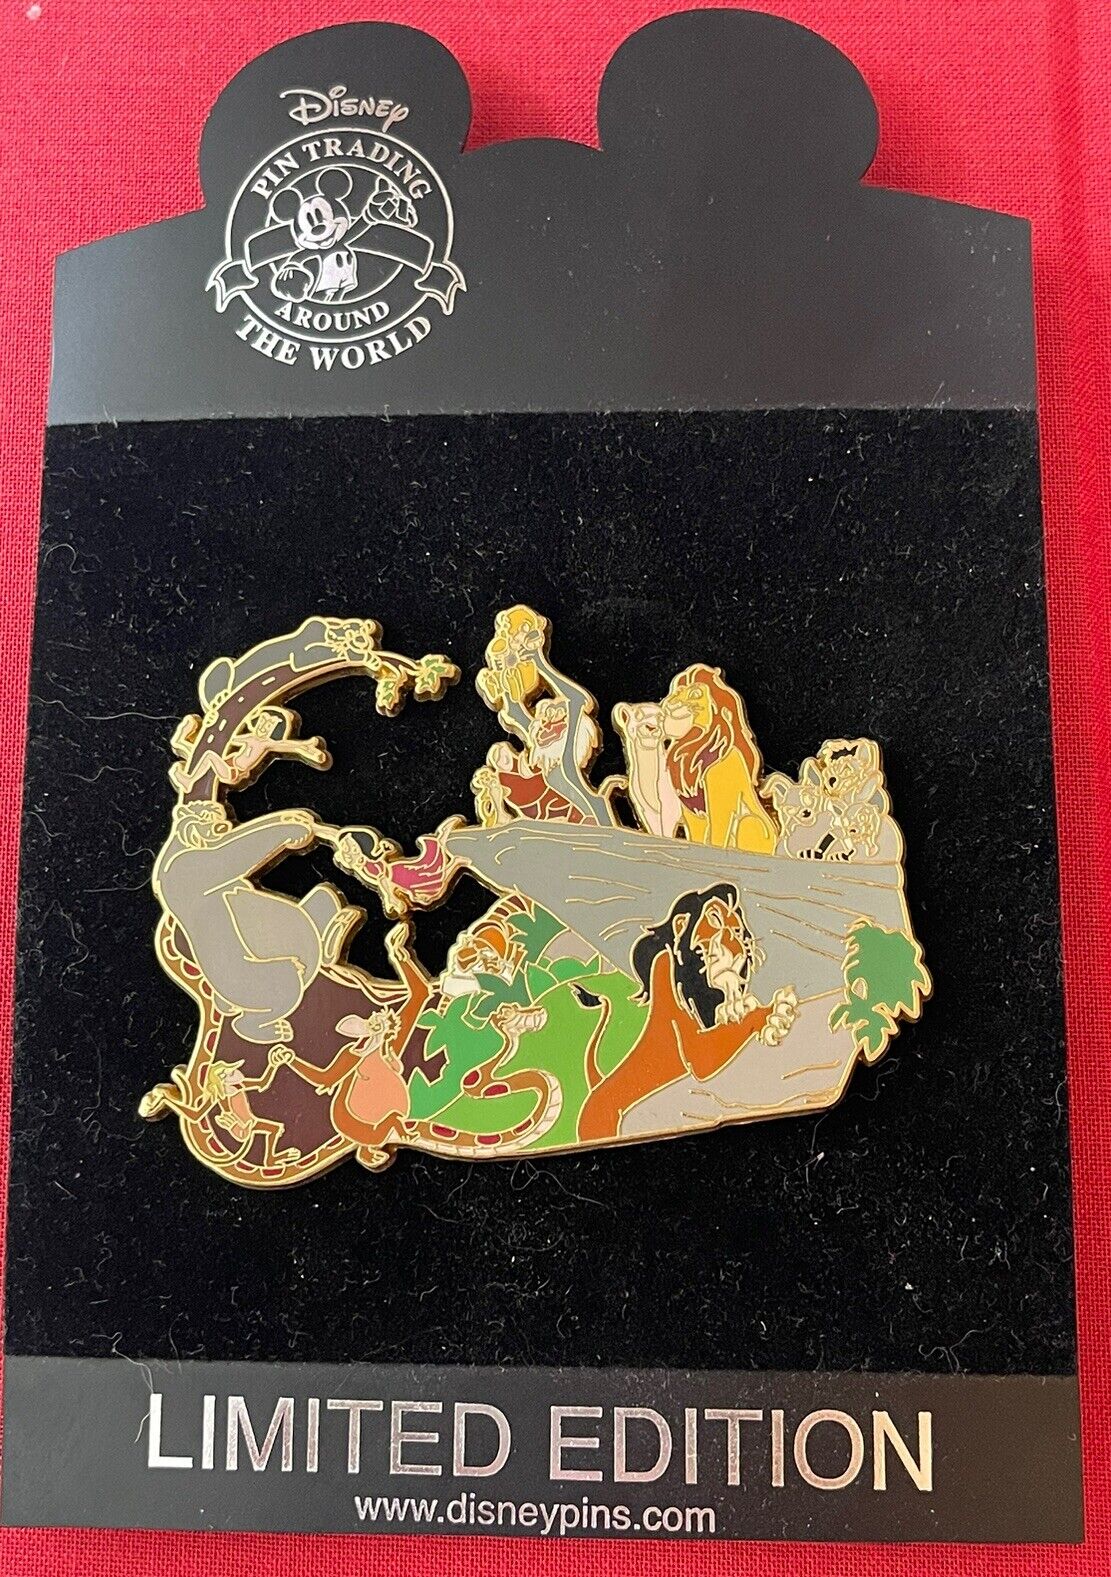 Disney Shopping Pin Lion King Meets Jungle Book Cluster LE 500